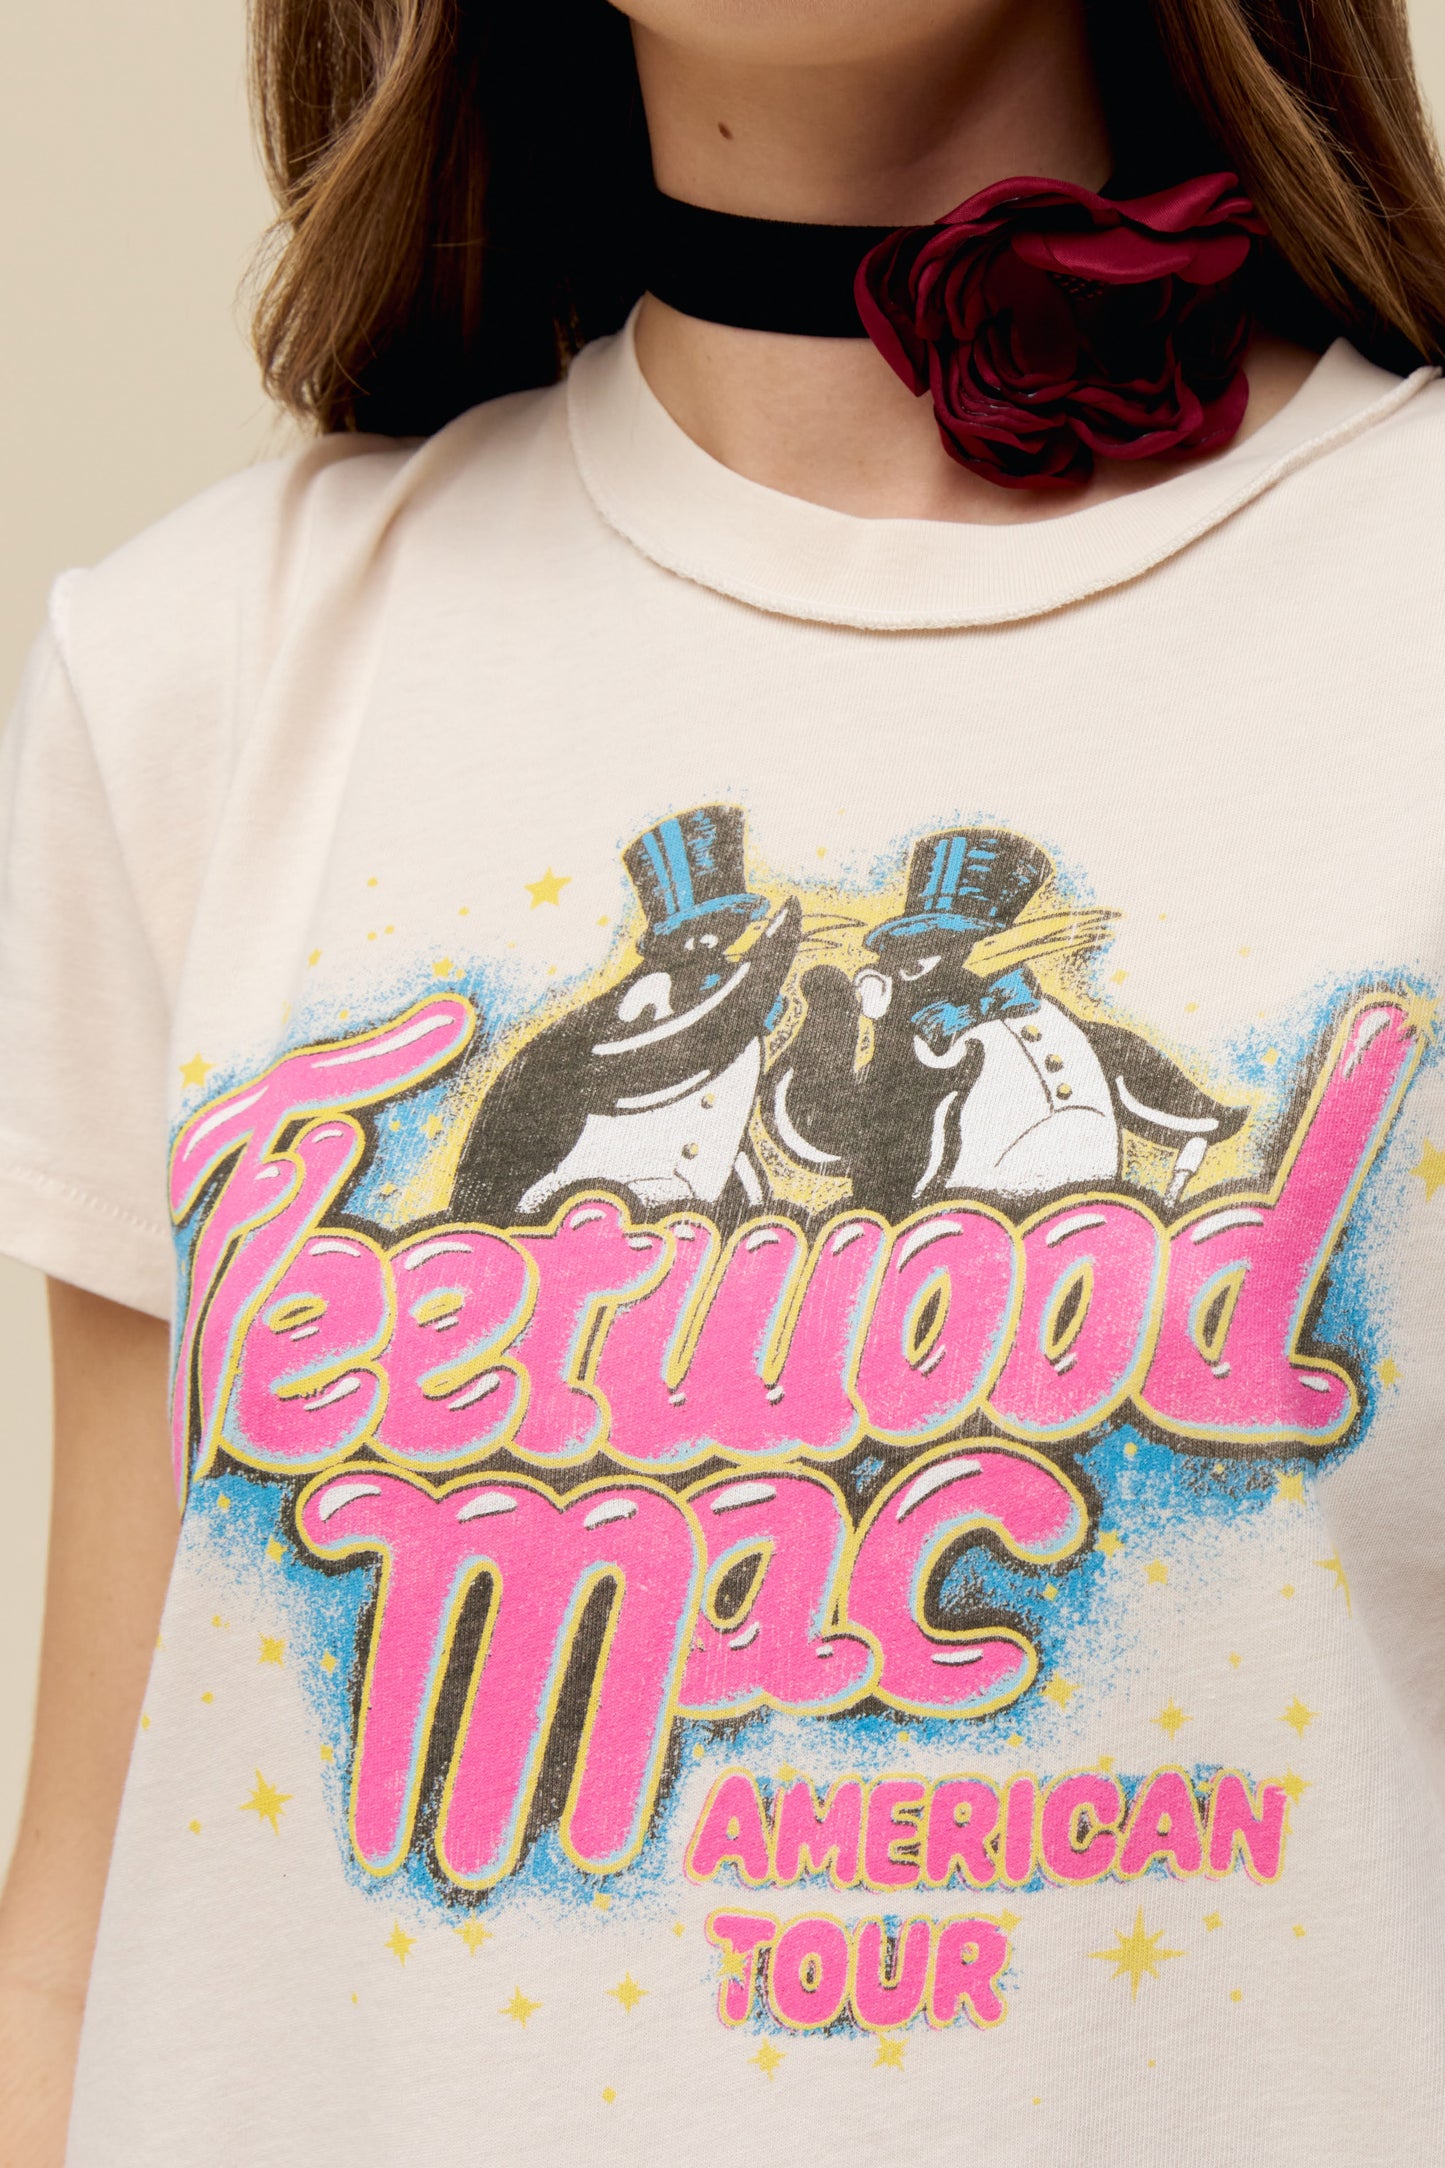 A model featuring a dirty white Fleetwood Mac tour tee designed with with their group name and a penguin graphic; with a special shoutout to their American Tour featuring their city stops stamped on the back.